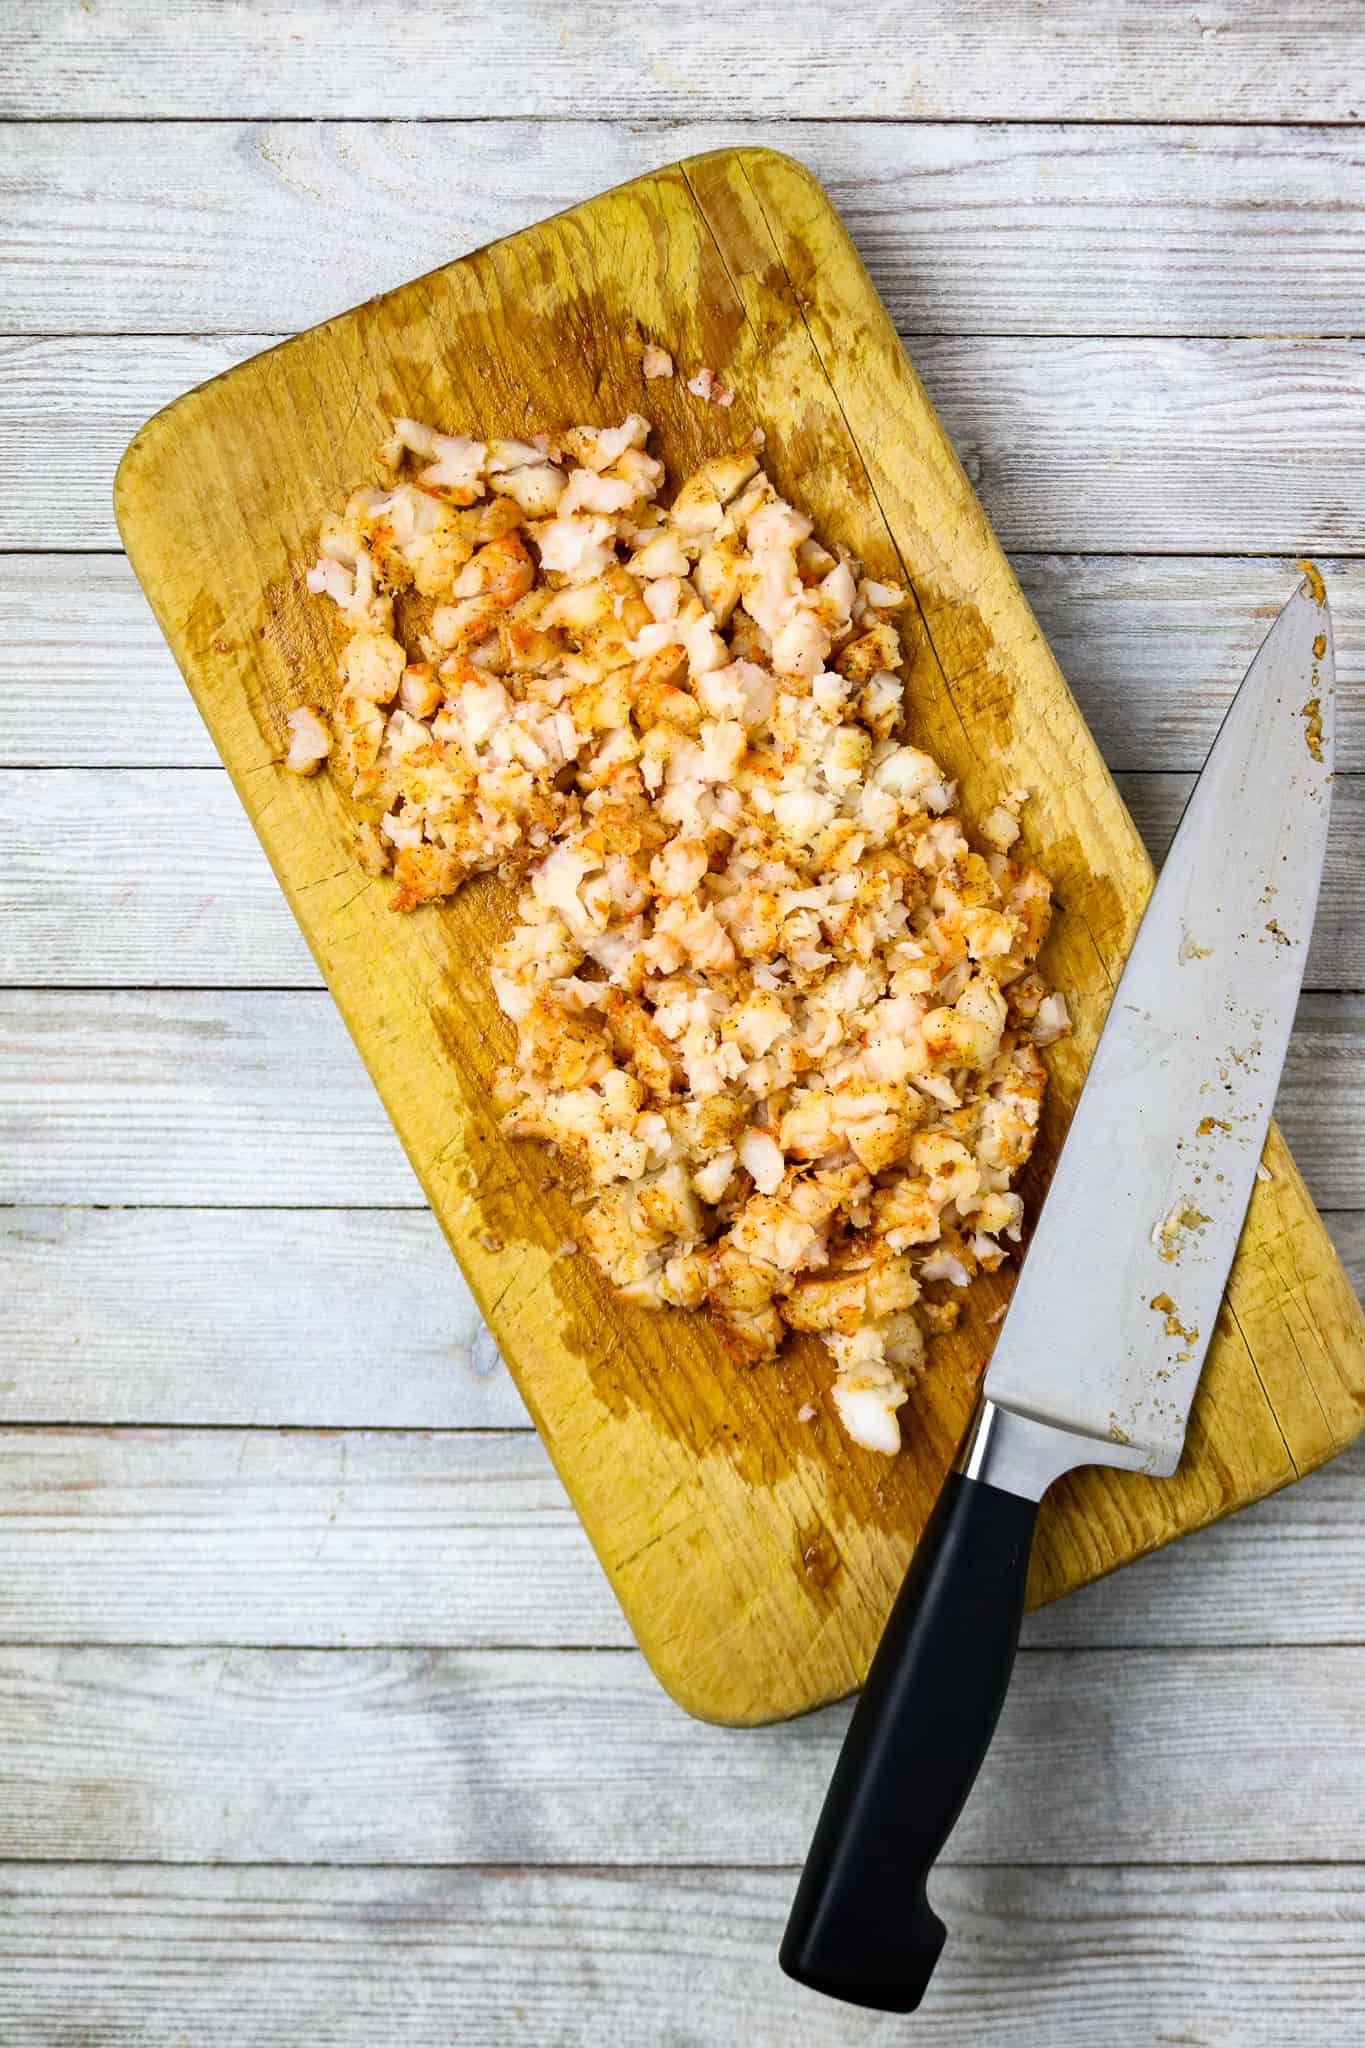 Chopped shrimp on a cutting board with a knife.